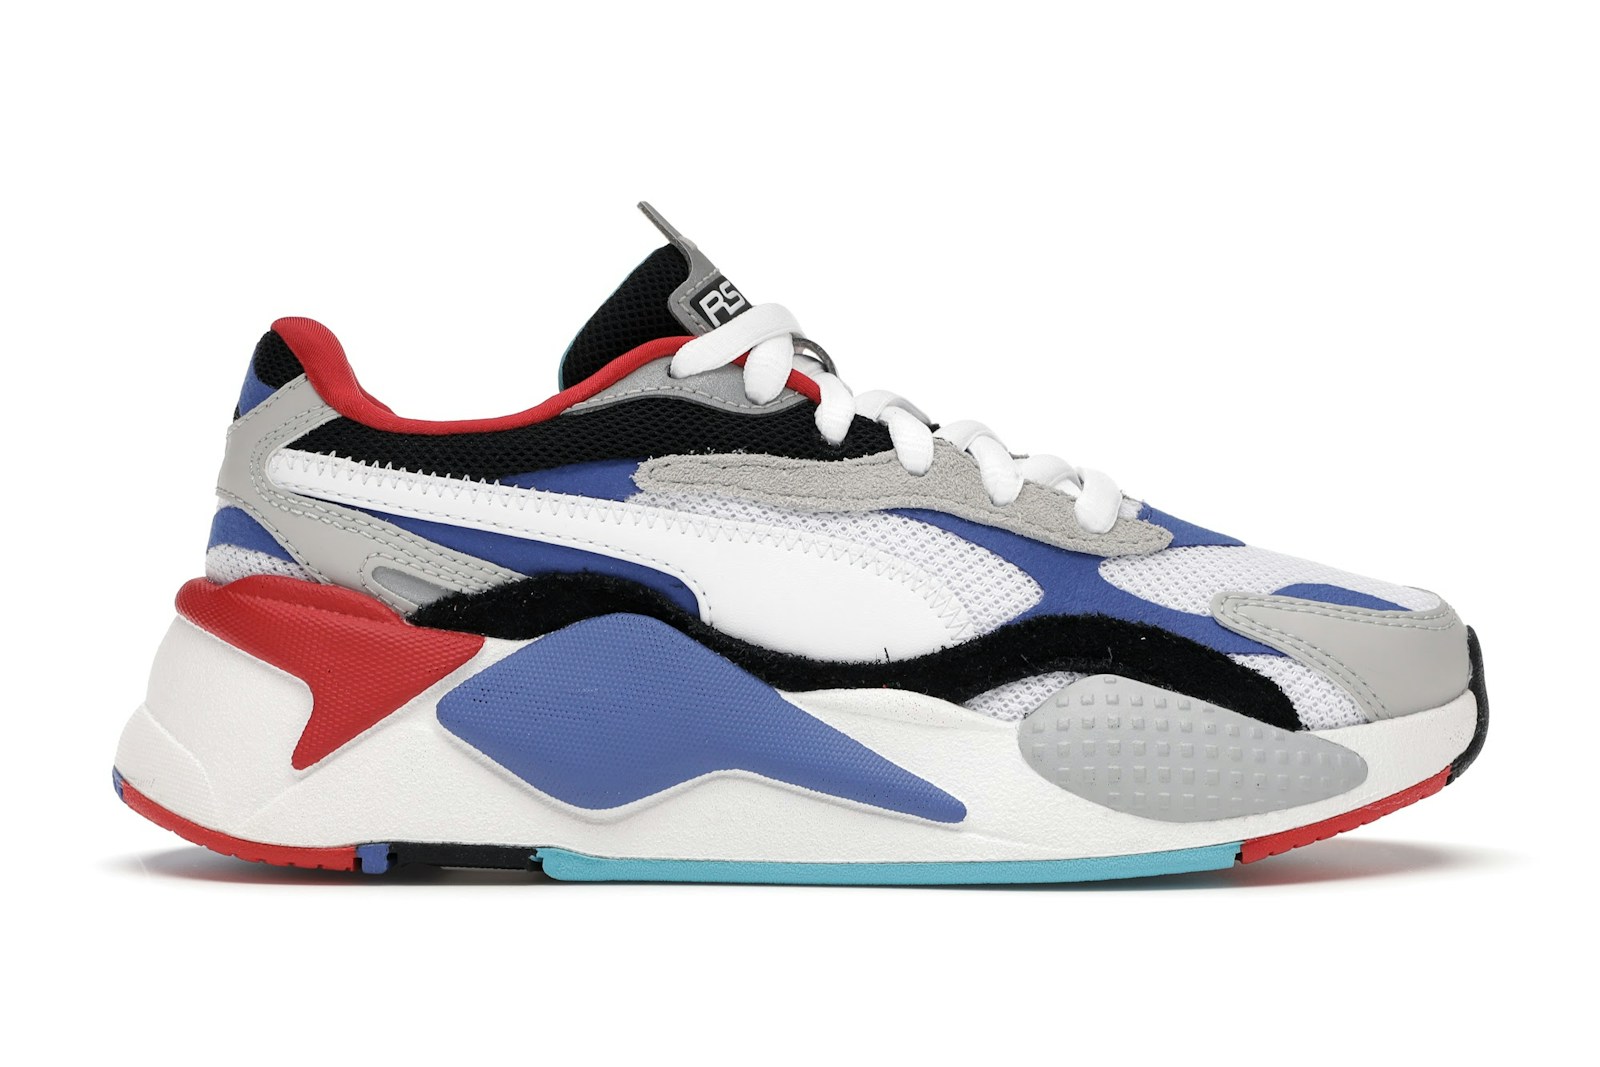 Puma RS-X 3 Puzzle White Blue Red (GS) - 372357-05